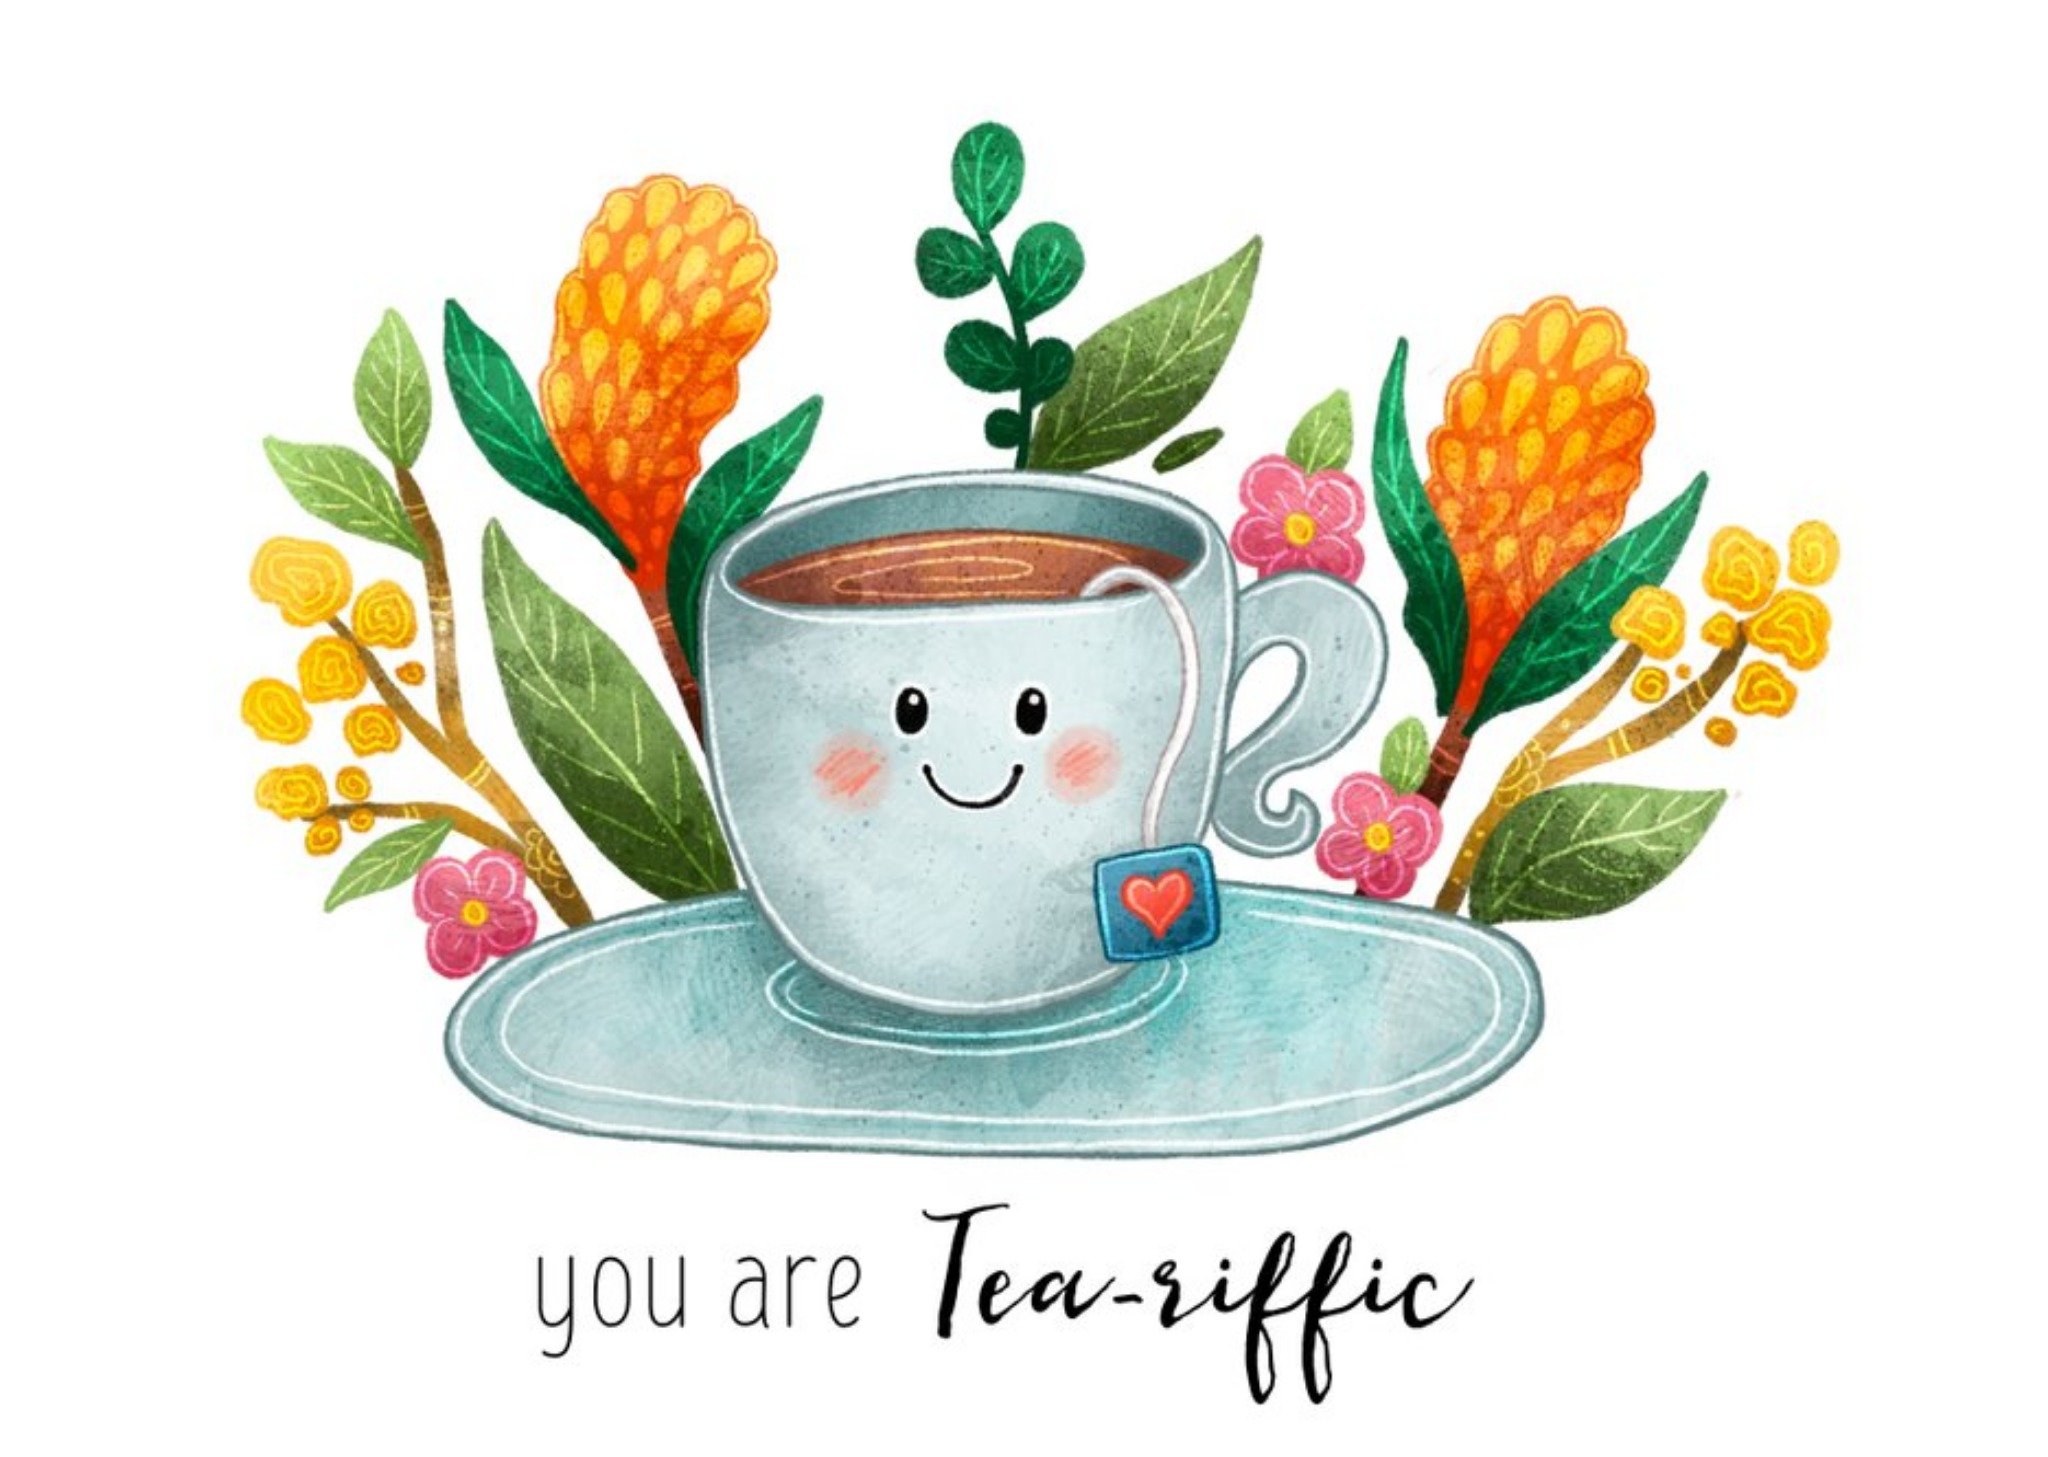 Moonpig Illustration Of A Smiling Teacup Surrounded By Flowers You Are Tea Riffic Card, Large